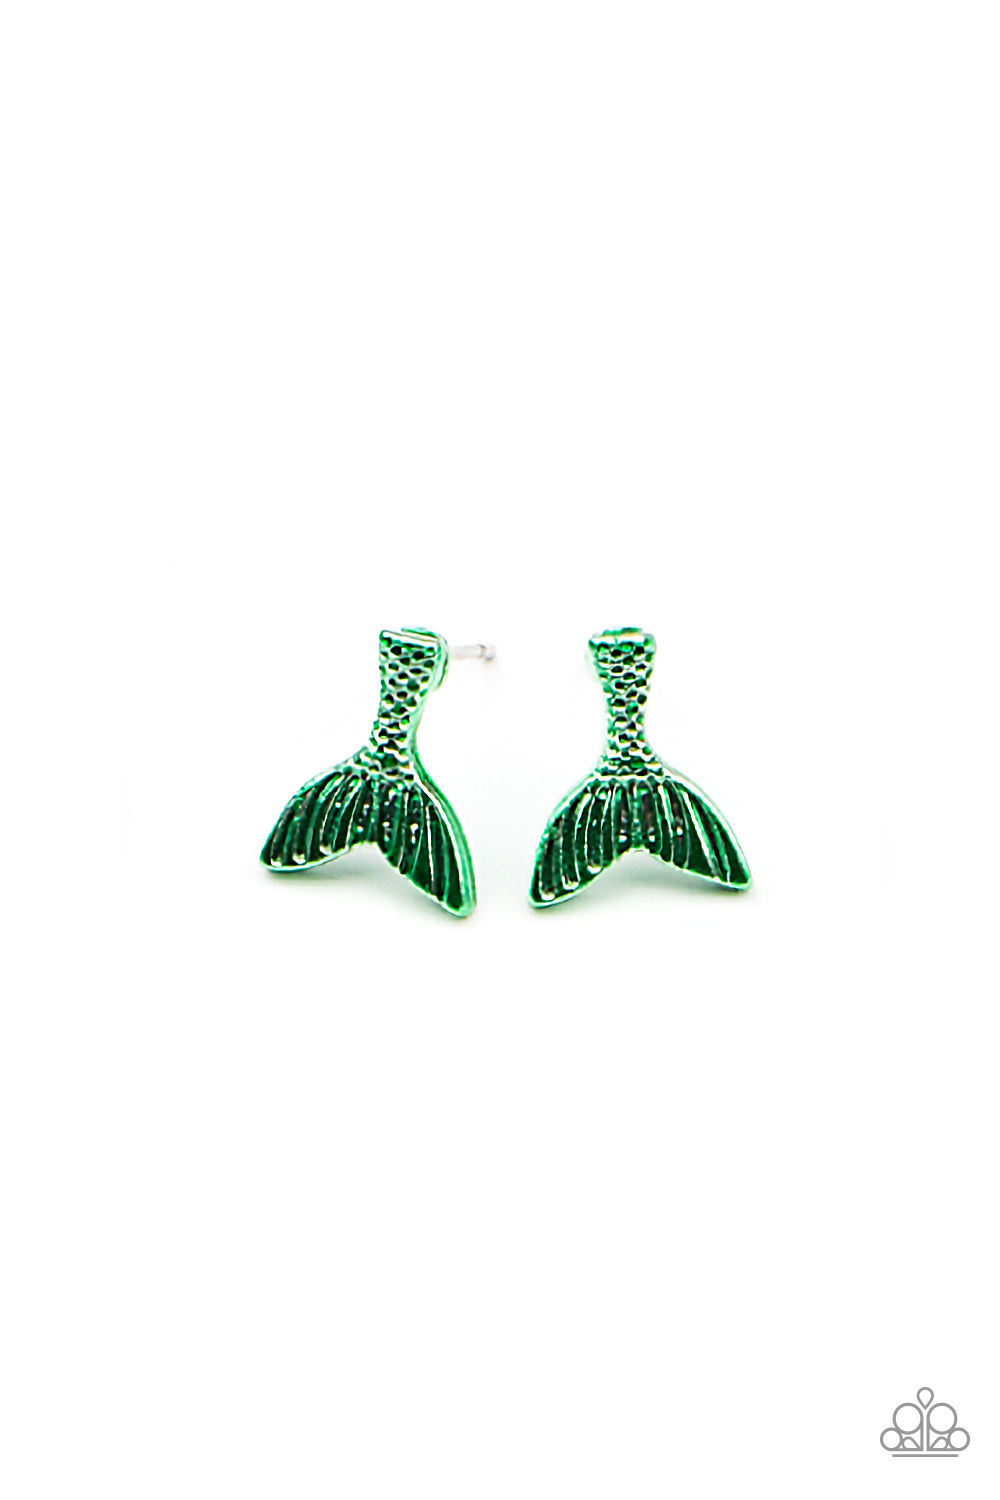 Earring - Starlet Shimmer Under the Sea - Mermaid Tail